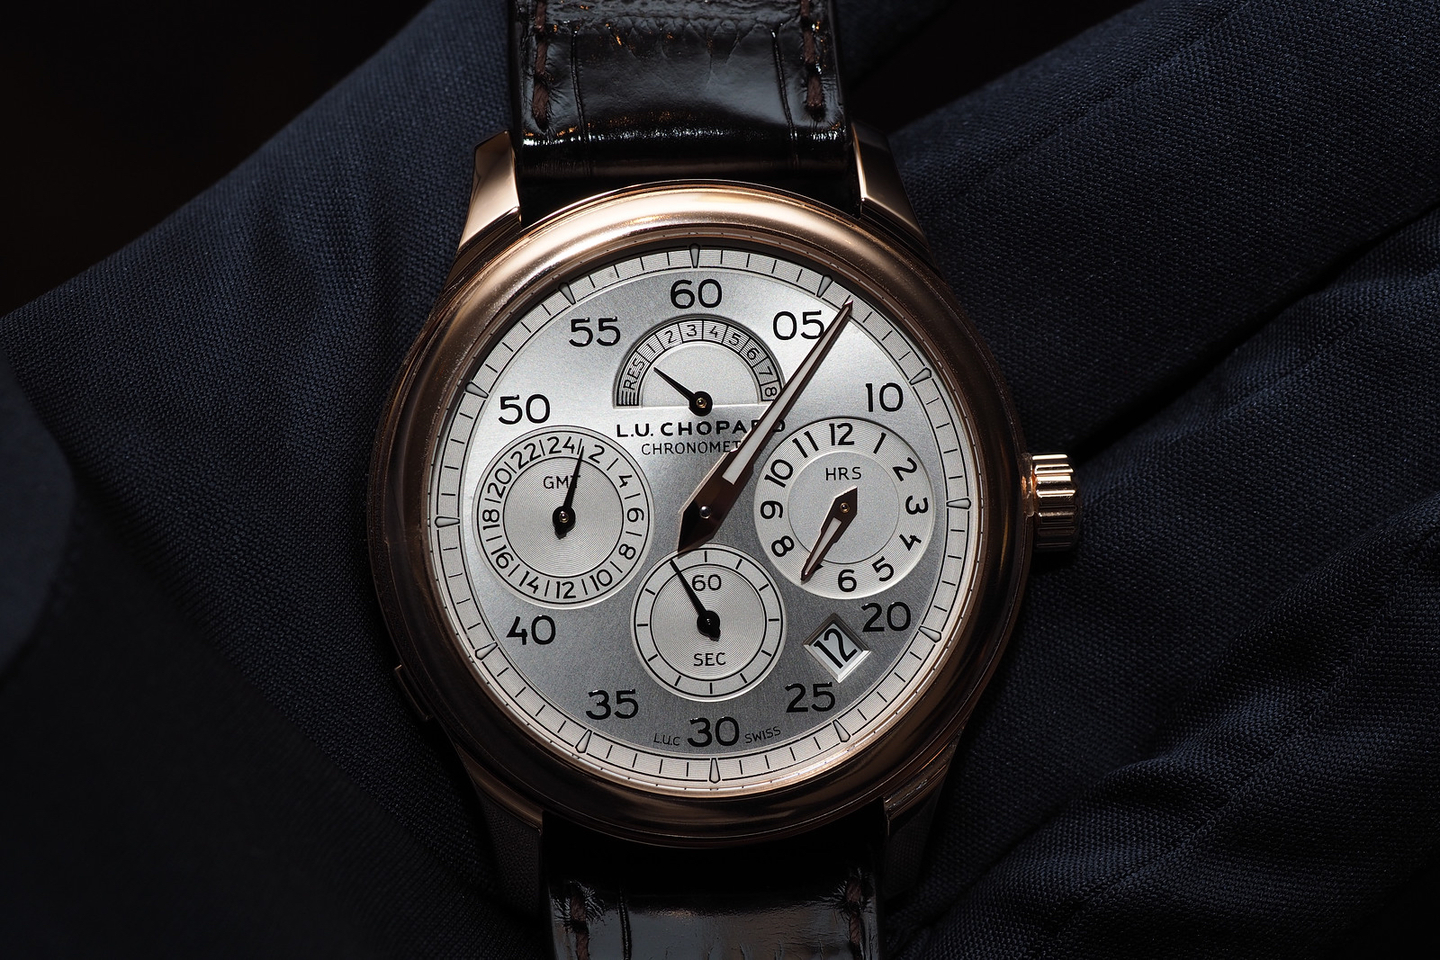 Hands-On with the Chopard L.U.C Regulator at Baselworld